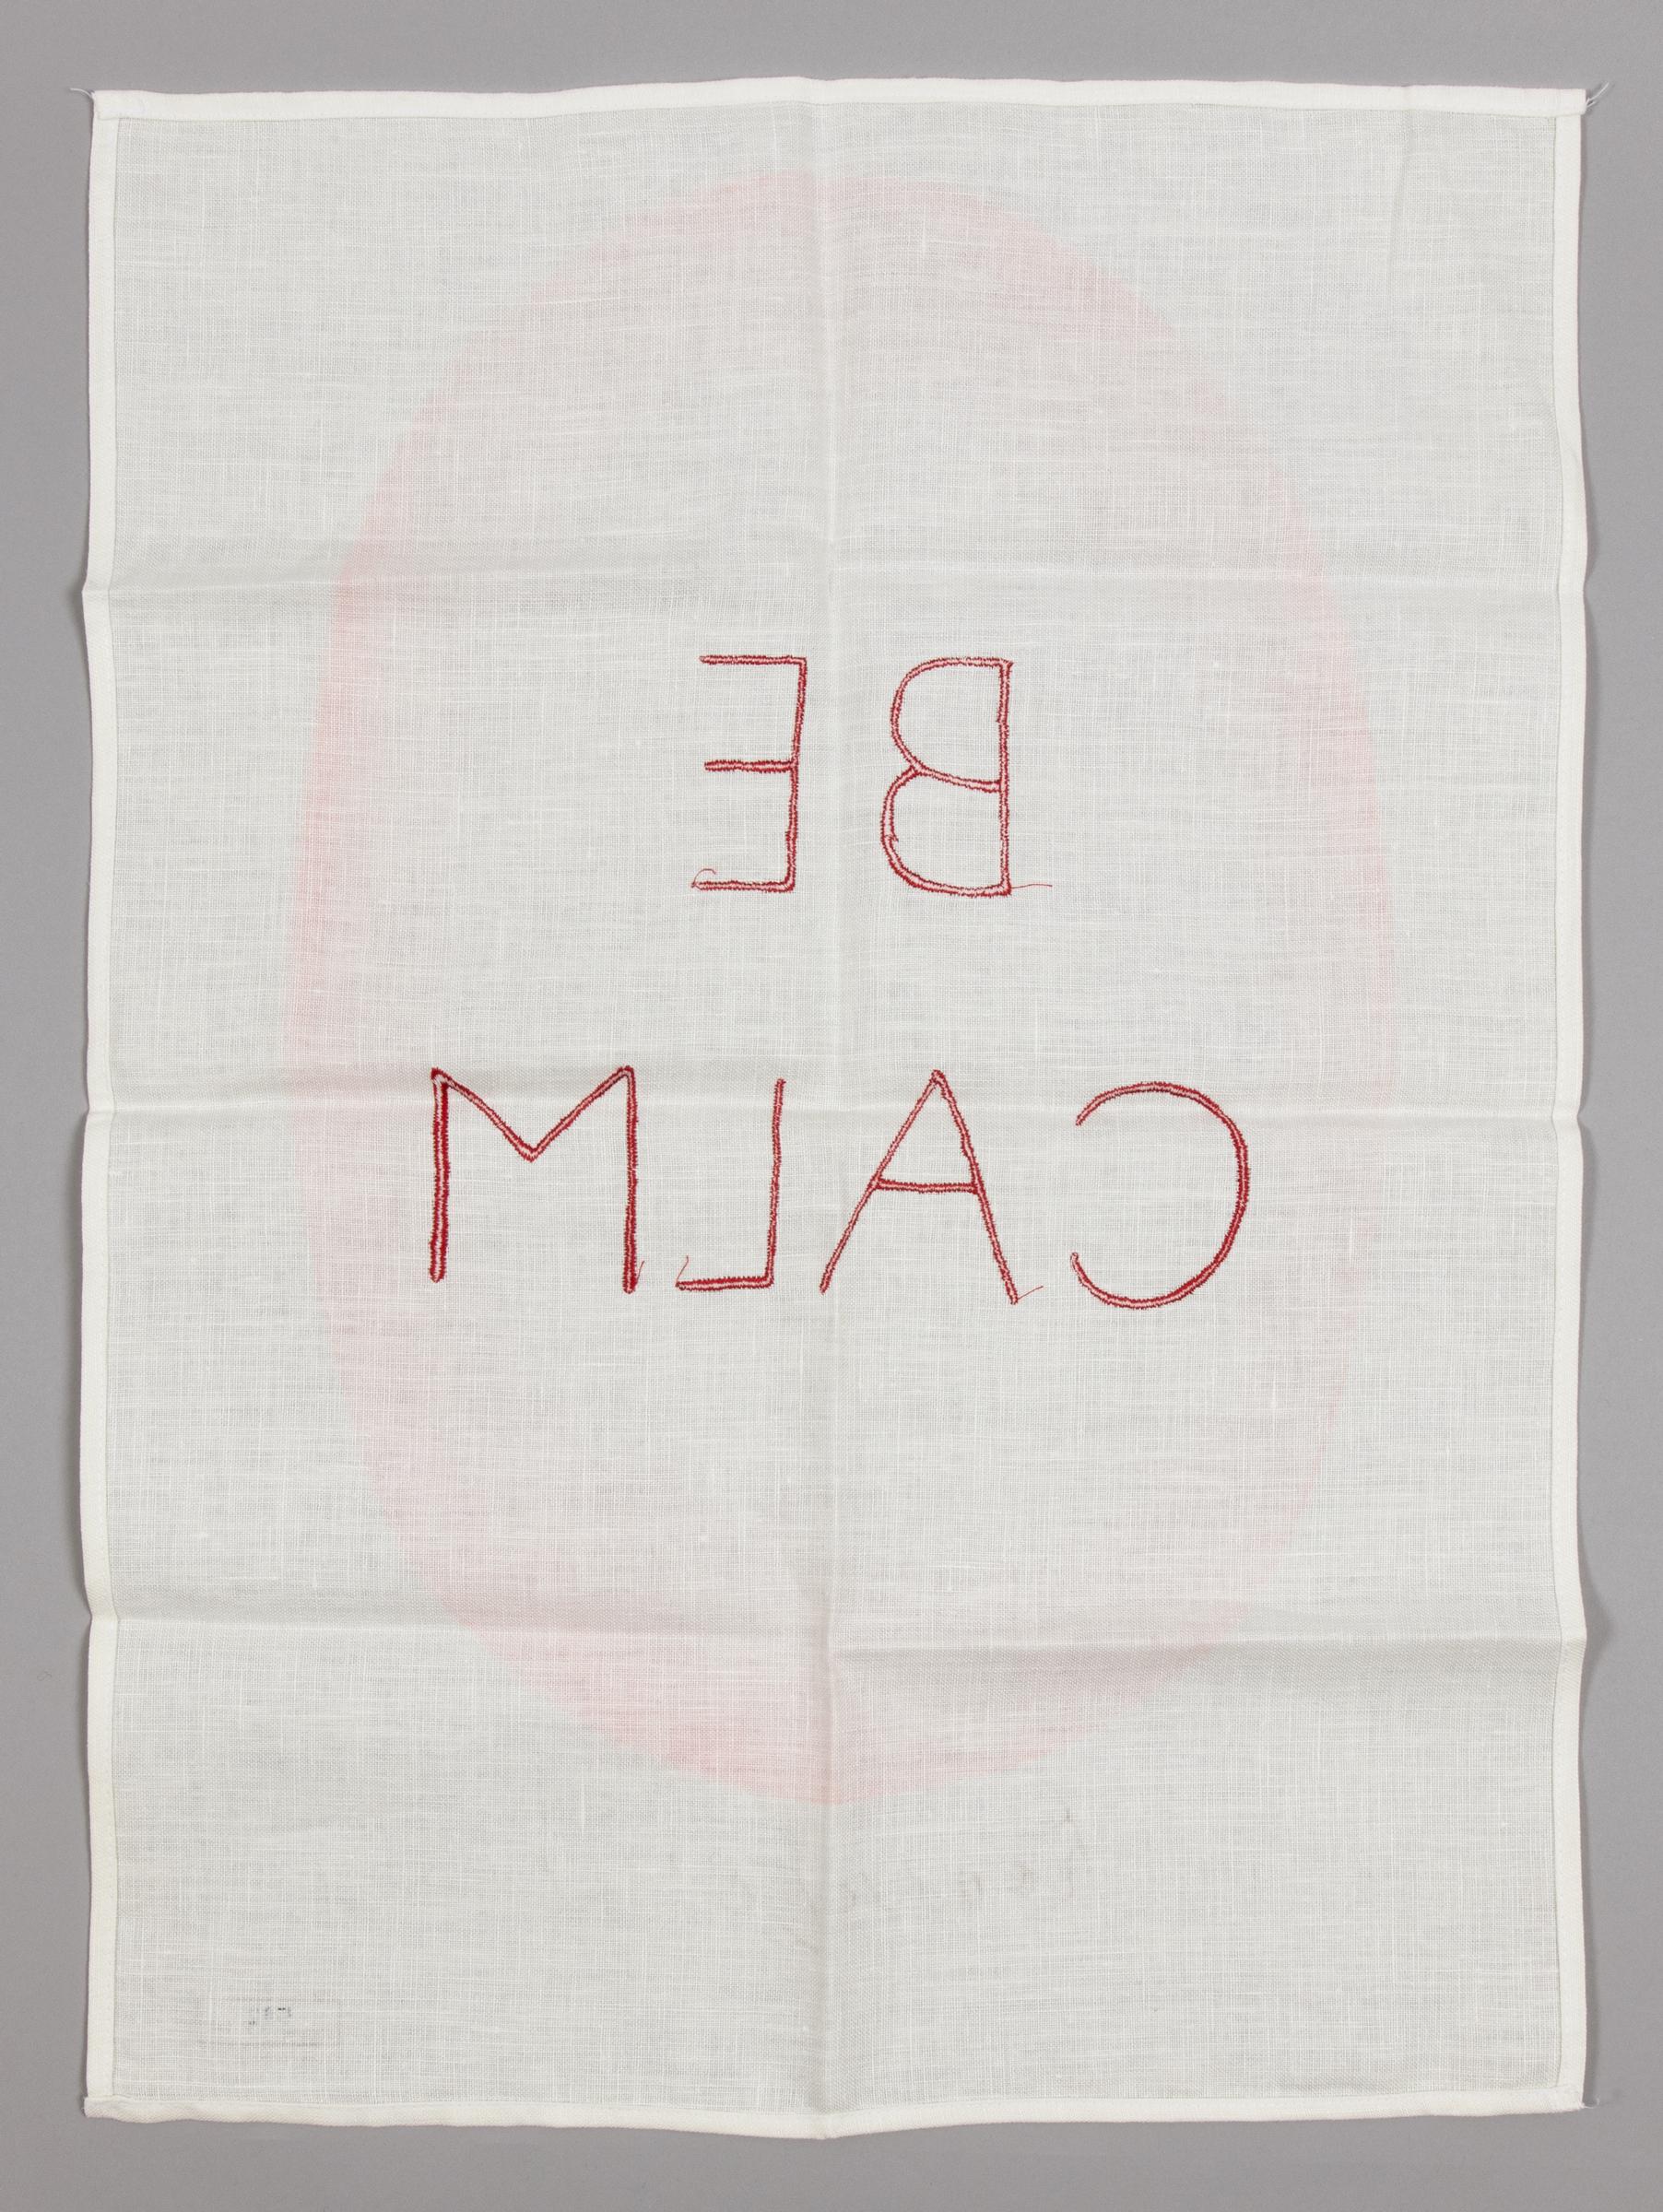 Louise Bourgeois (French-American, 1911-2010)
Be Calm, 2005
Medium: Screenprint and embroidery on linen tea towel
Dimensions: 69.9 × 48.3 cm (27 1/2 × 19 in)
Edition of 1000: Plate-signed, printed signature and numbered on towel; numbered on